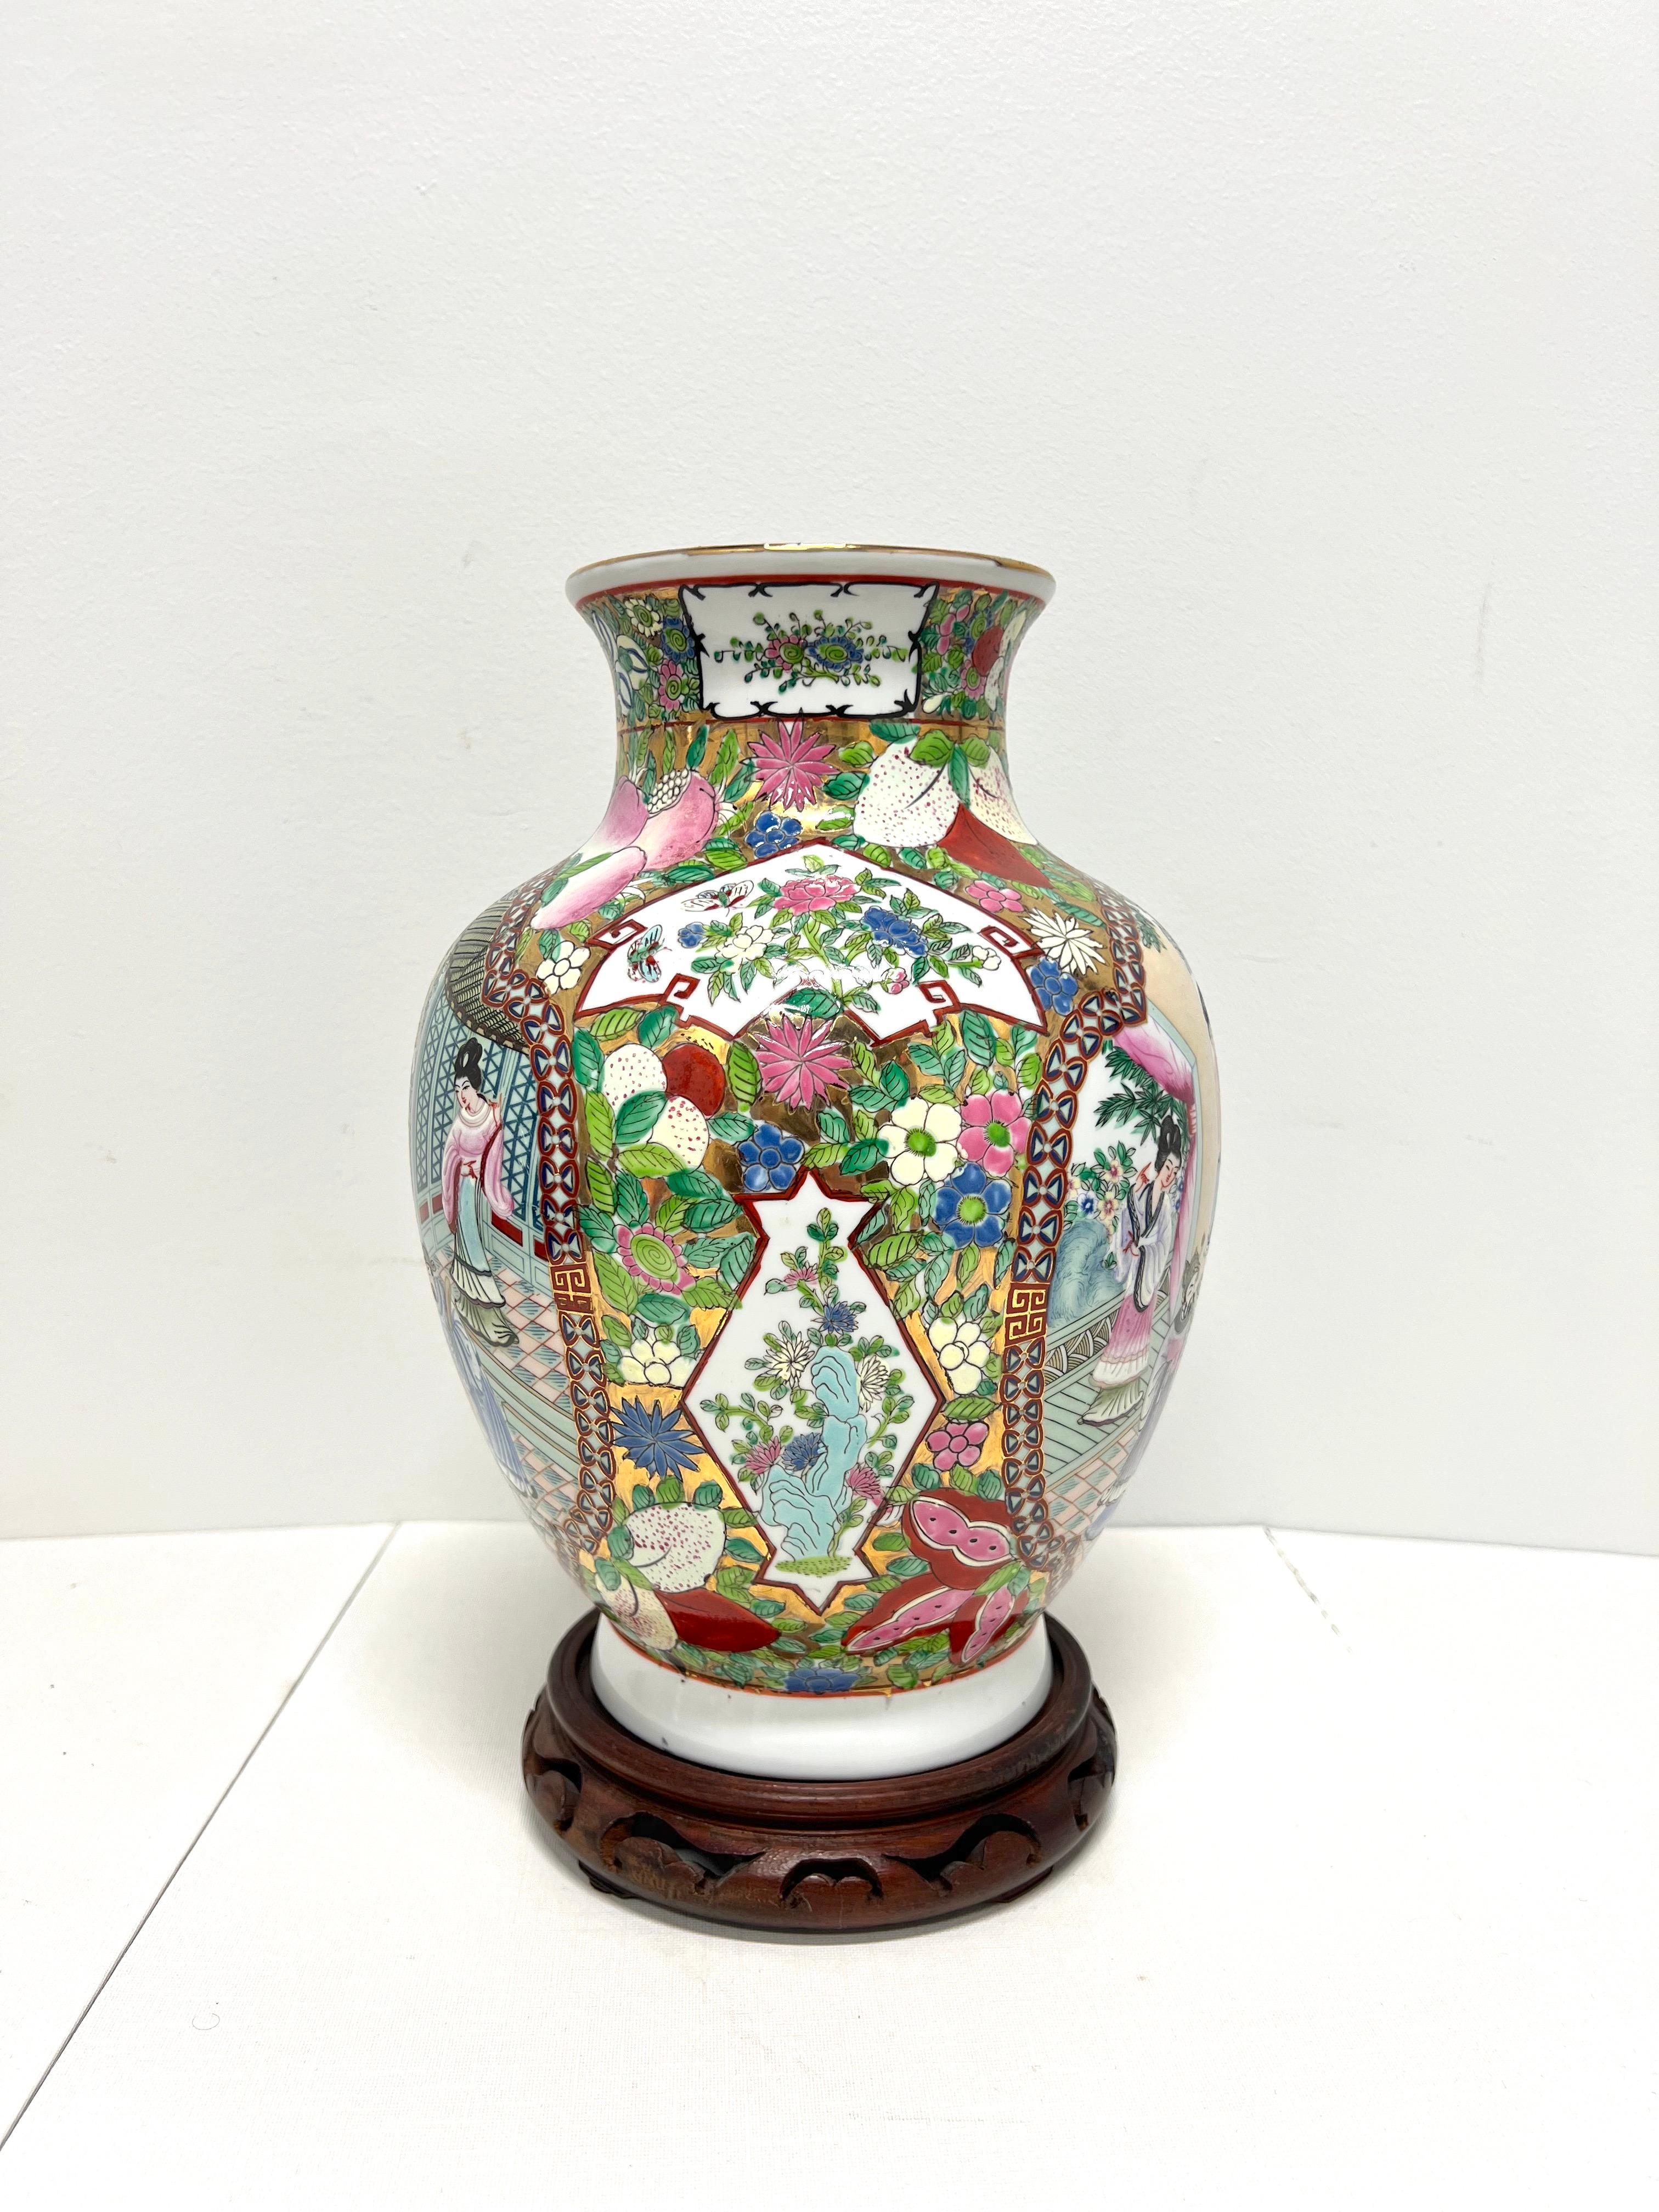 A Mid 20th Century Chinese Export style decorative porcelain vase with stand, unbranded. A beautiful multi-color porcelain broad urn shaped vase with hand painted Chinoiserie scenes, a textured finish, and a separate decoratively carved round wood